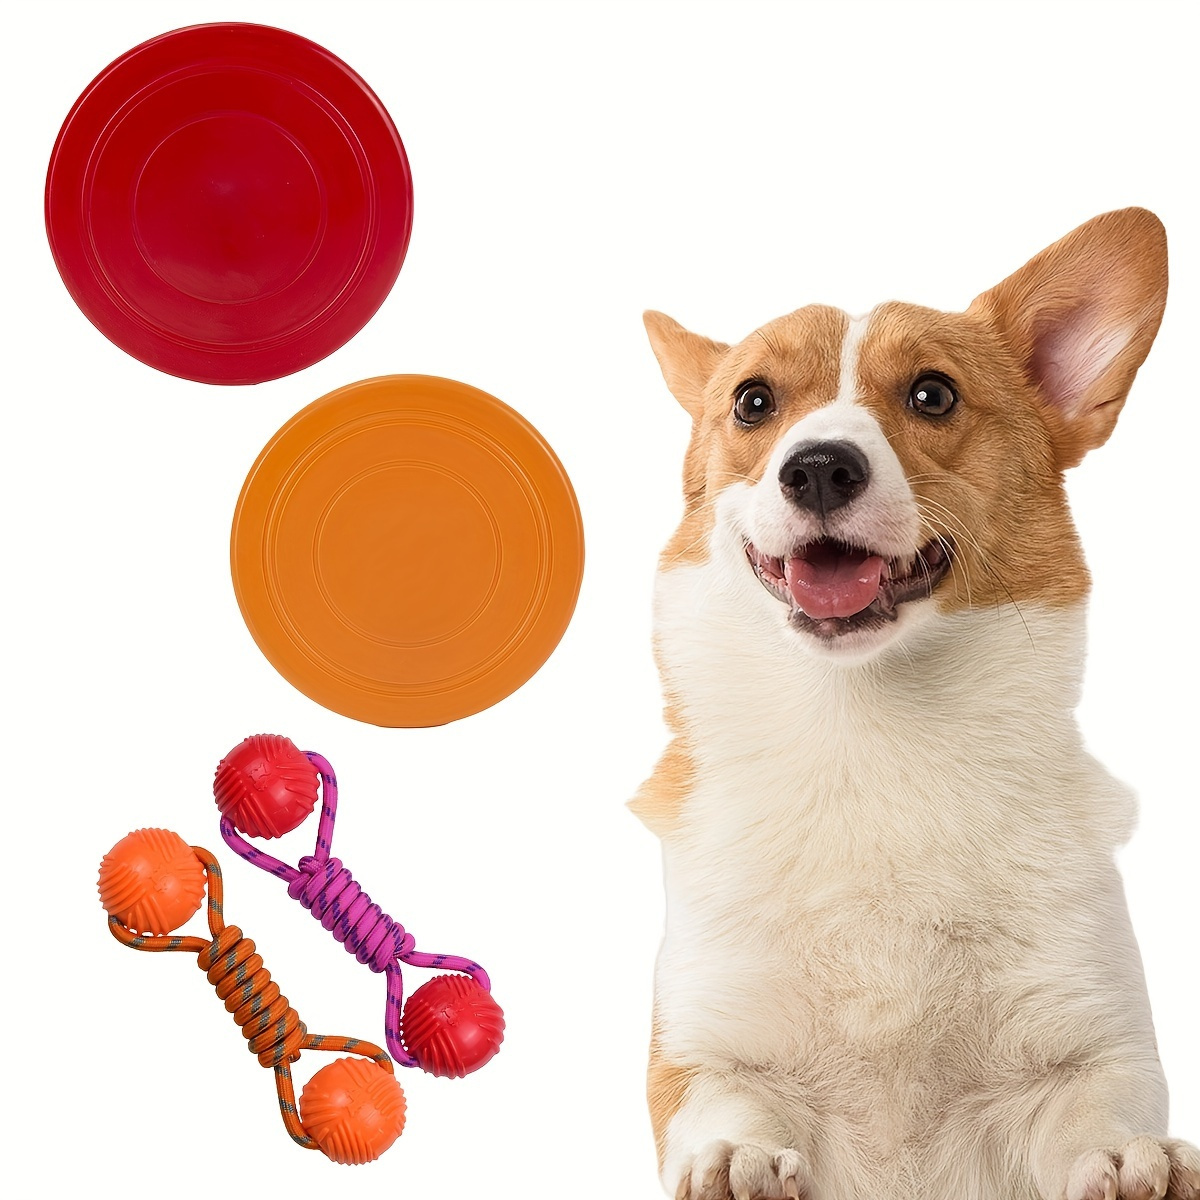 Omega Paw Small Tricky Treat Ball